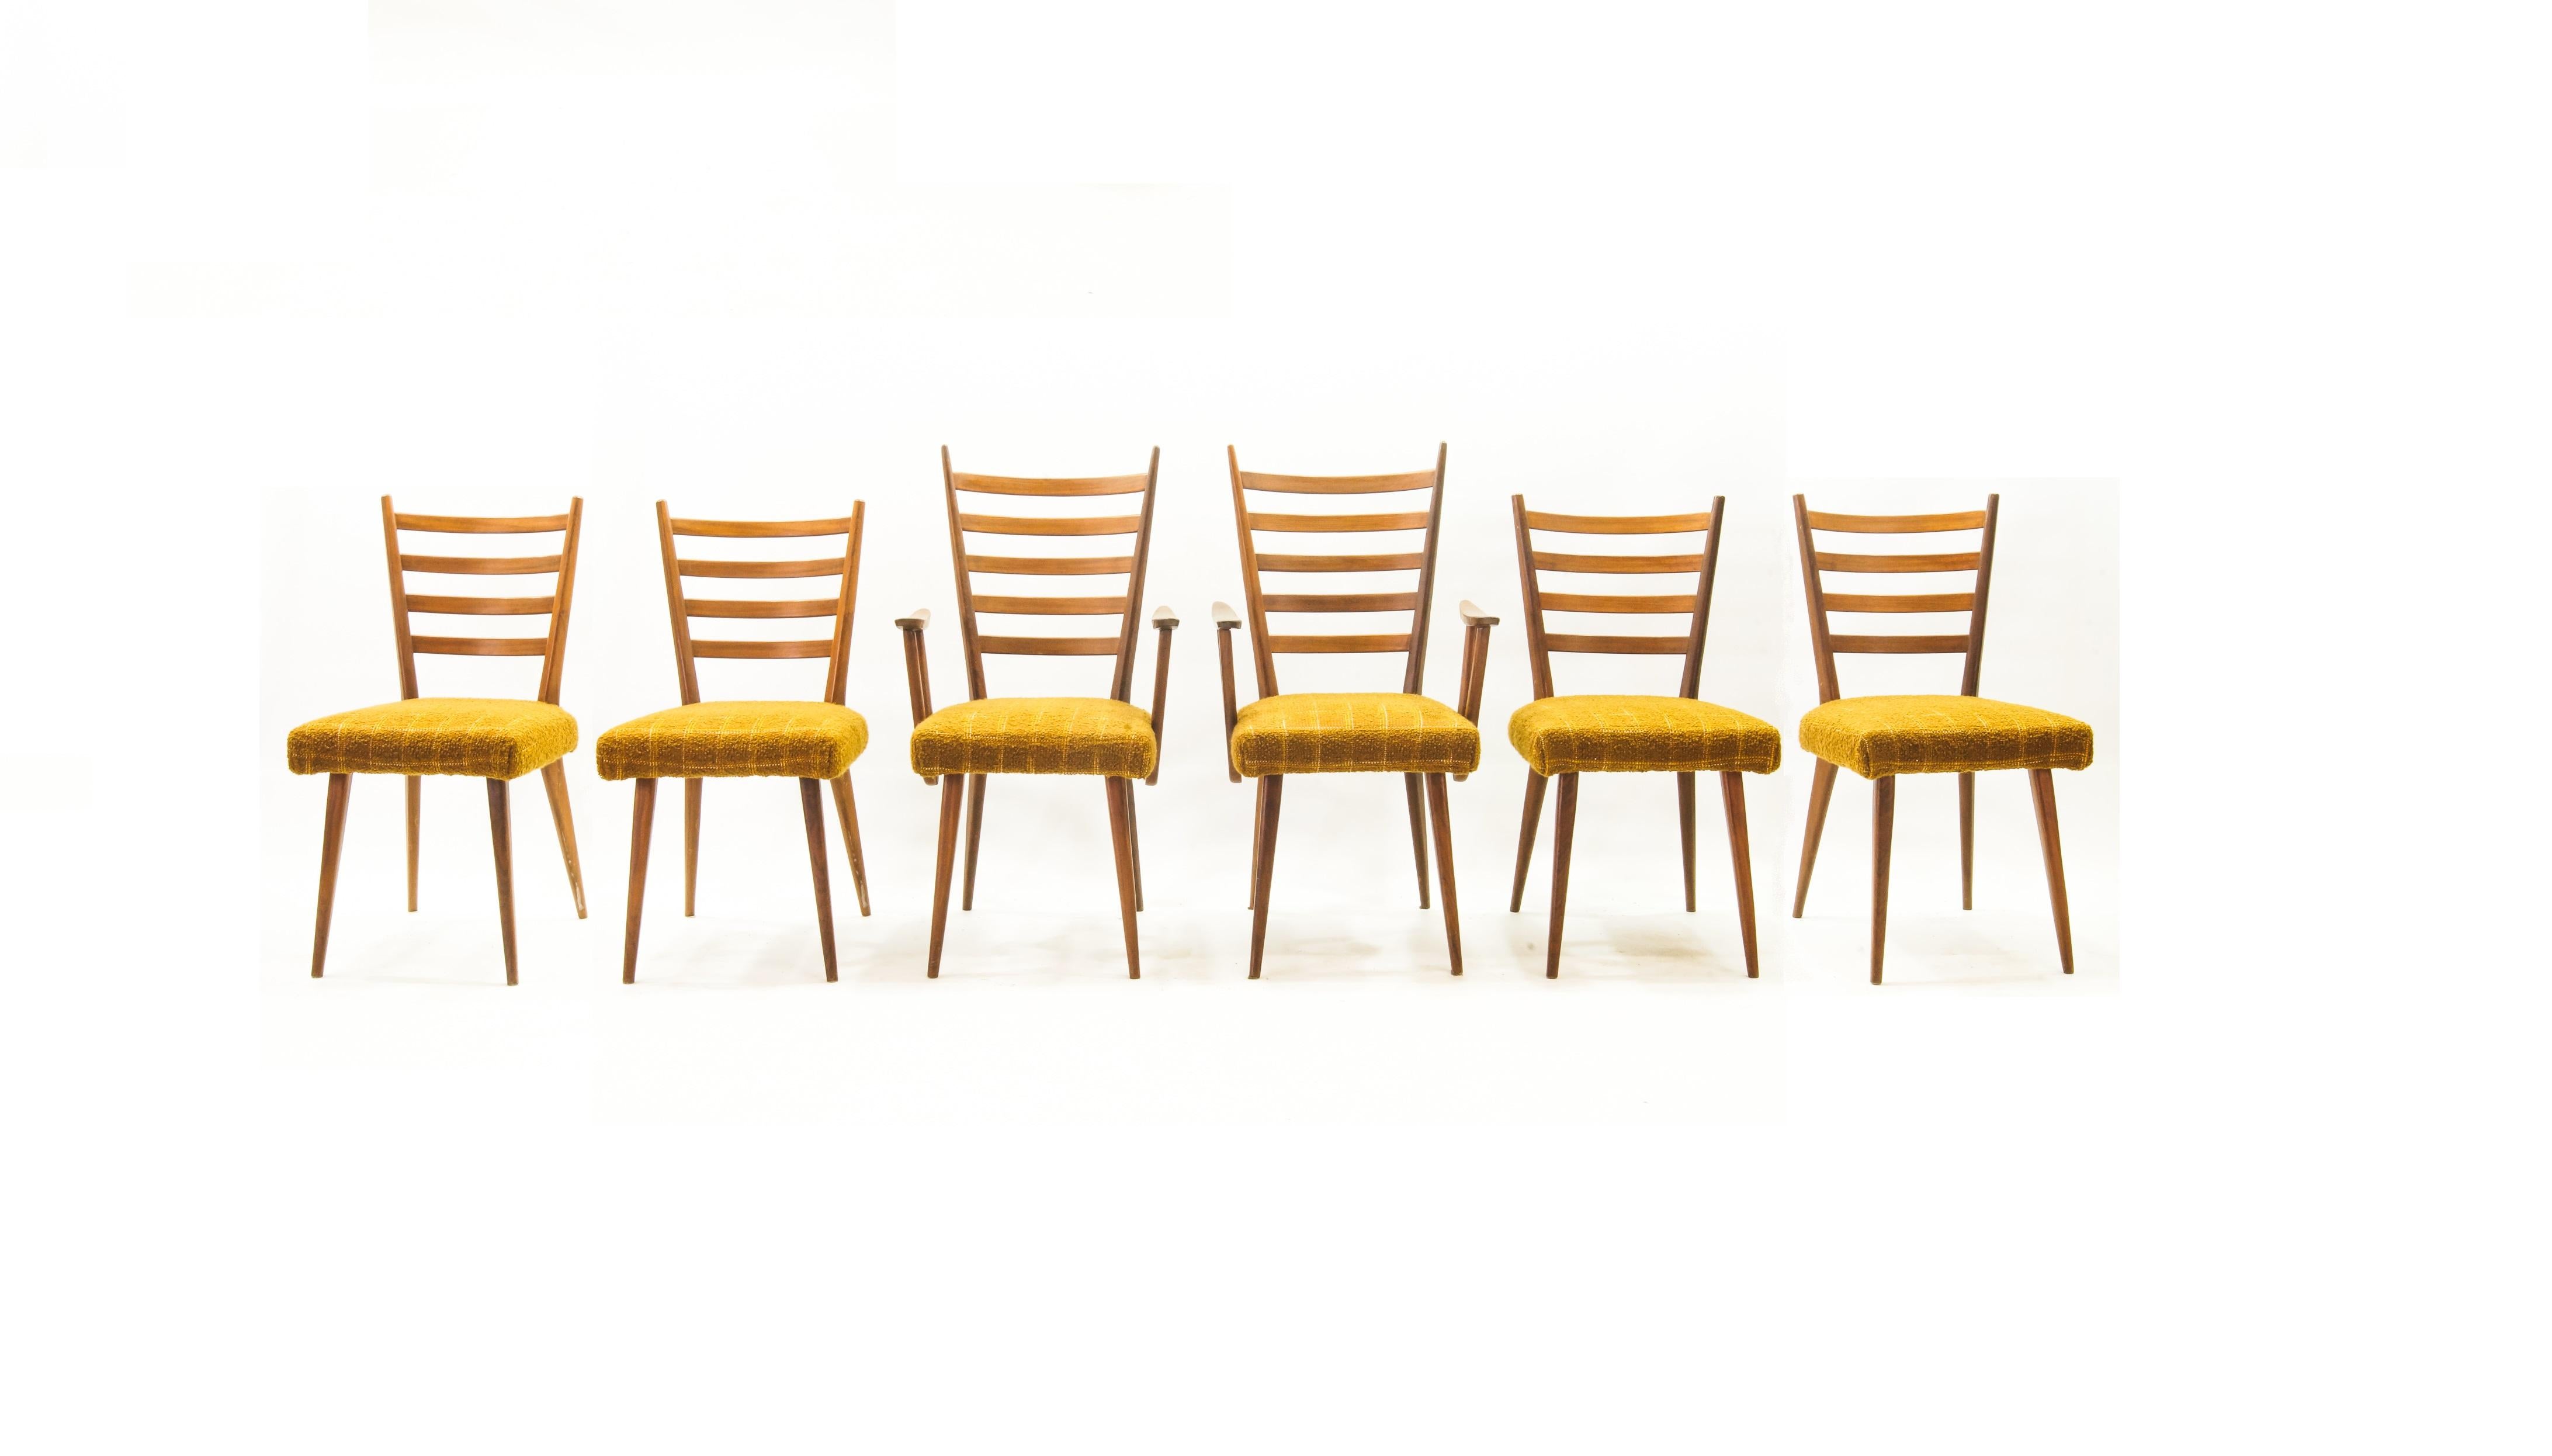 Netherlands, 1950's
Cees Braakman for Pastoe - Ladder Chairs, 1950's - dinerset of 6intage teak chairs / dining chairs made by Cees Braakman for the famous Dutch factory Pastoe. The chairs are in considerably good condition. Seating area is